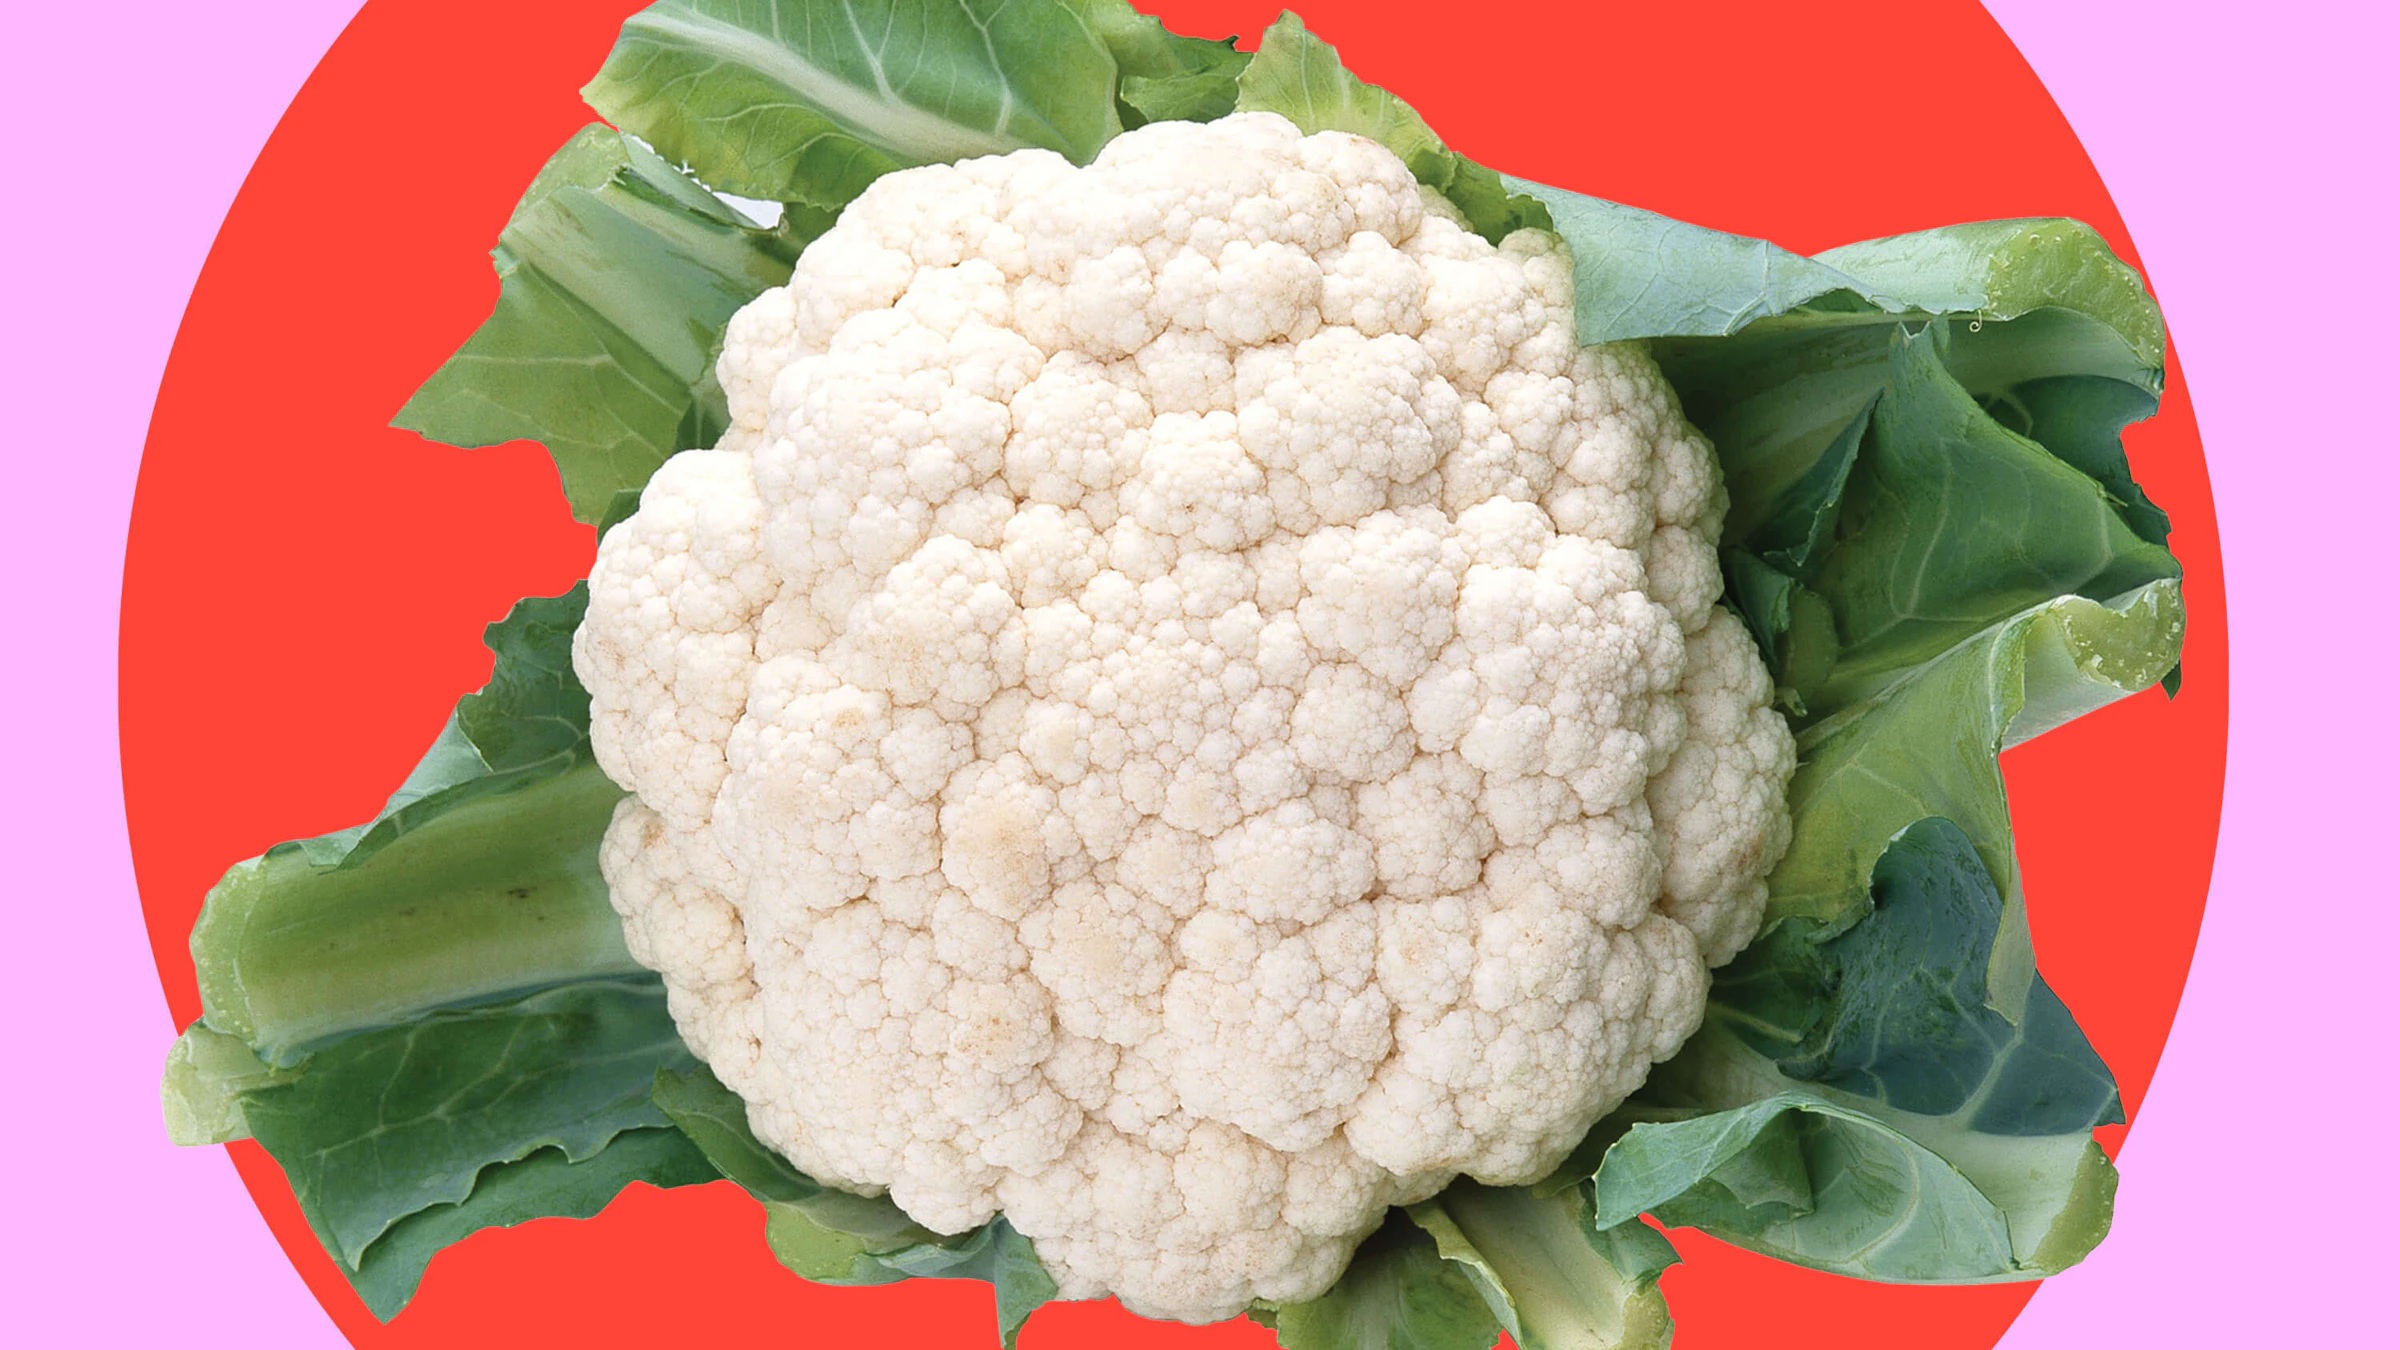 Lettuce and Cauliflower on Red and Pink Background